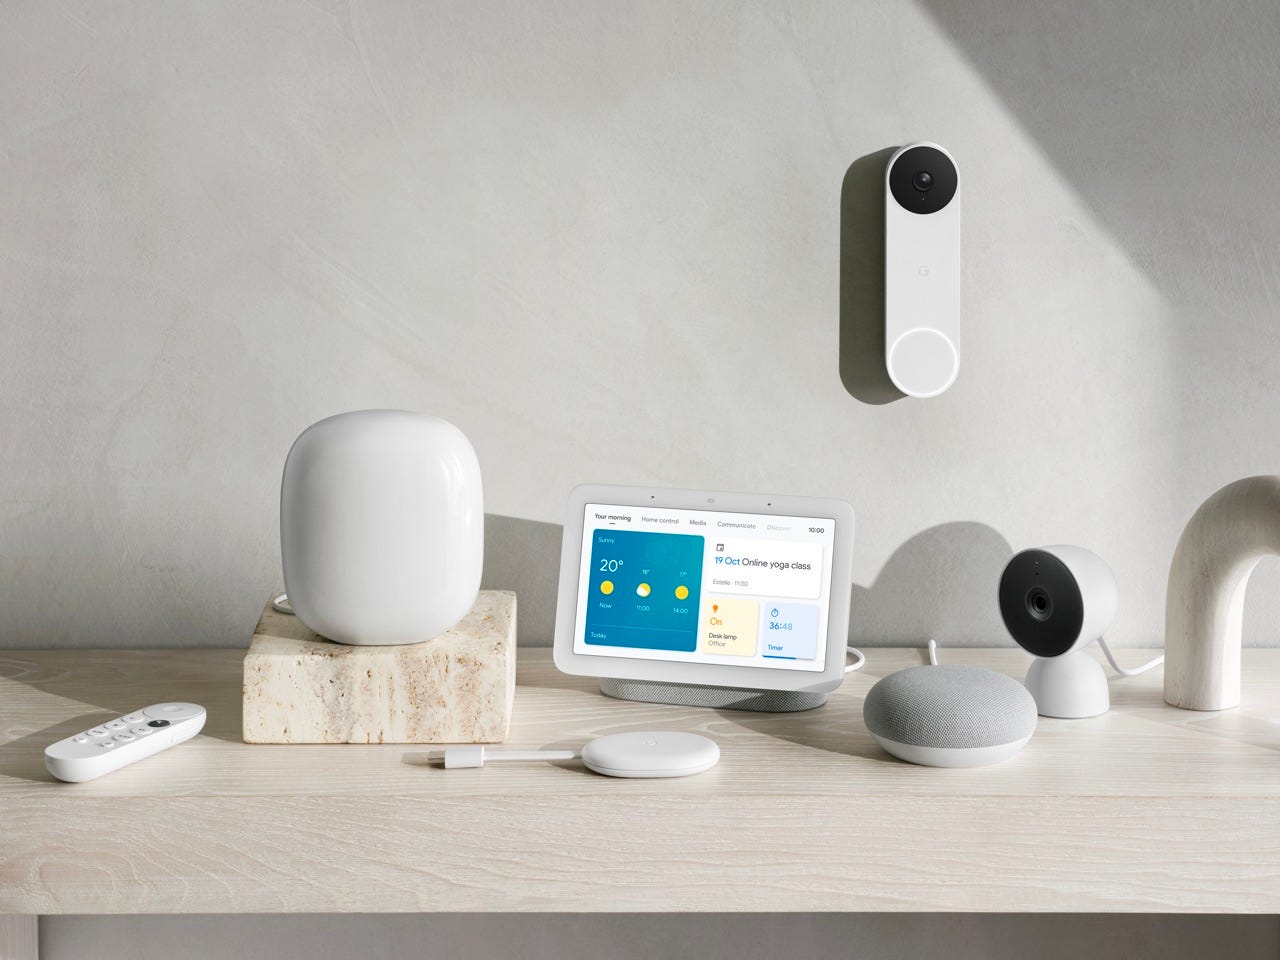 Nest Wi-Fi is a big improvement over Google Wi-Fi. But is it